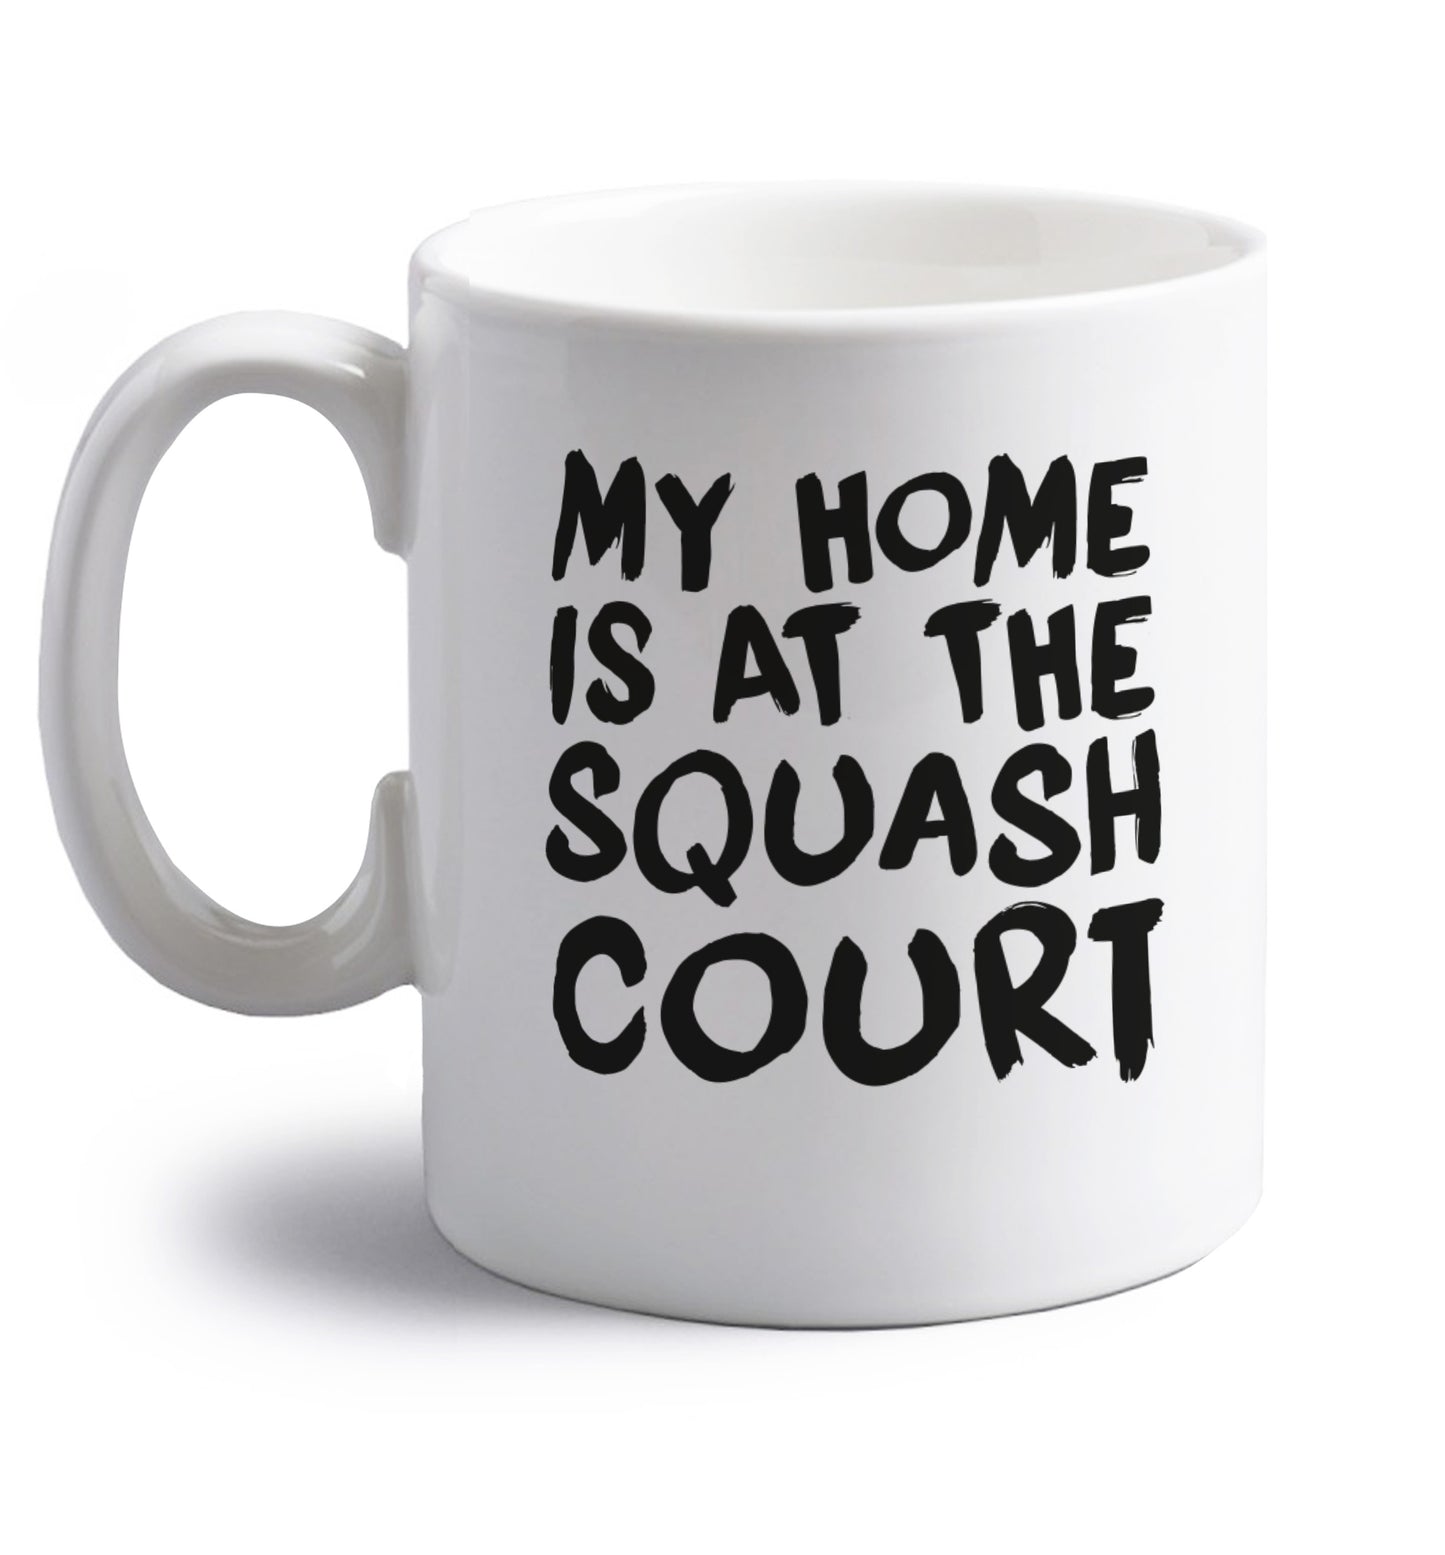 My home is at the squash court right handed white ceramic mug 